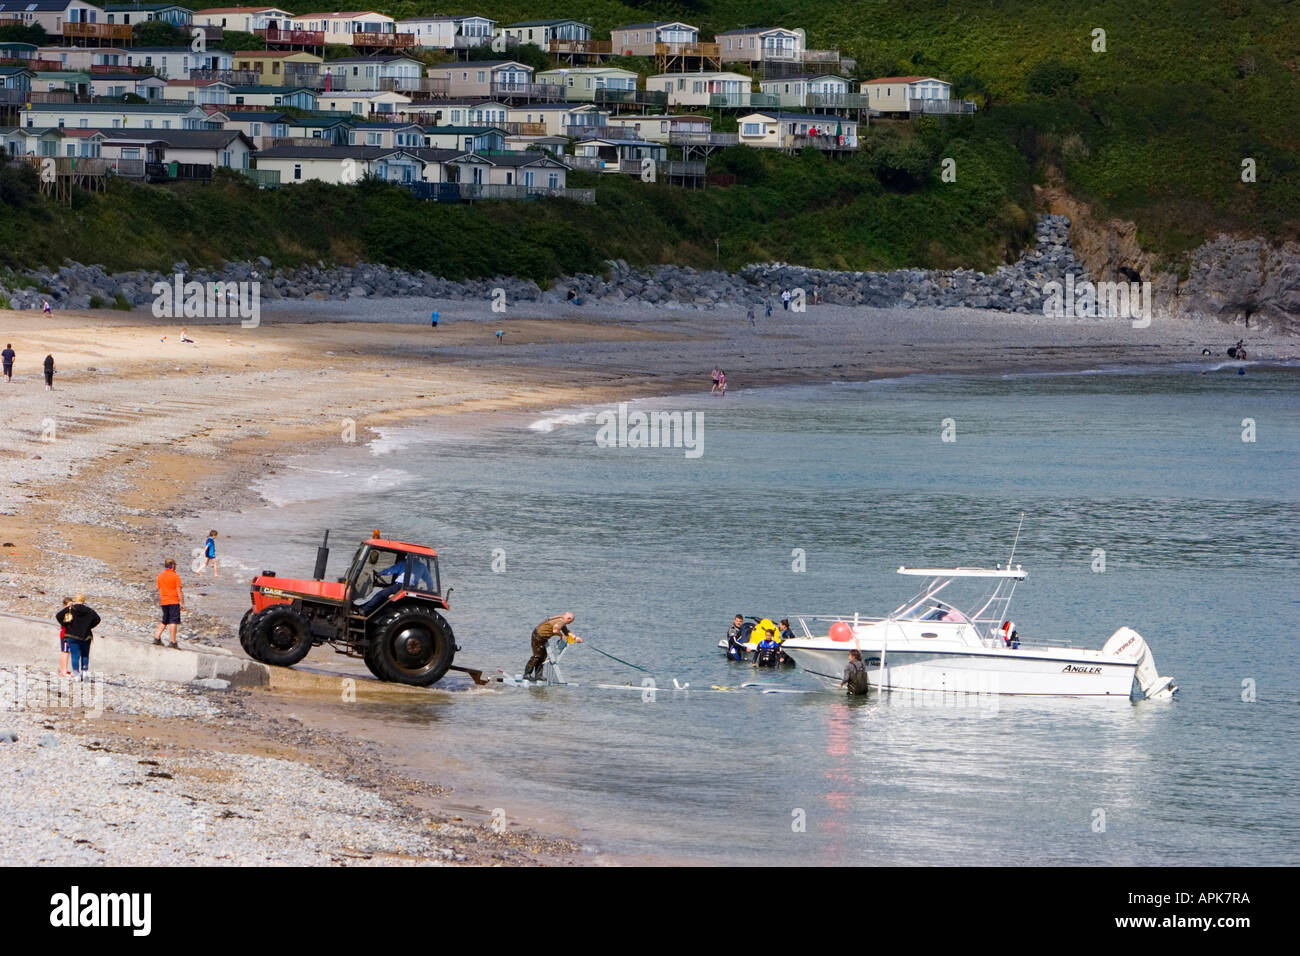 Tractor used for haulage and other work on the beach Stock Photo